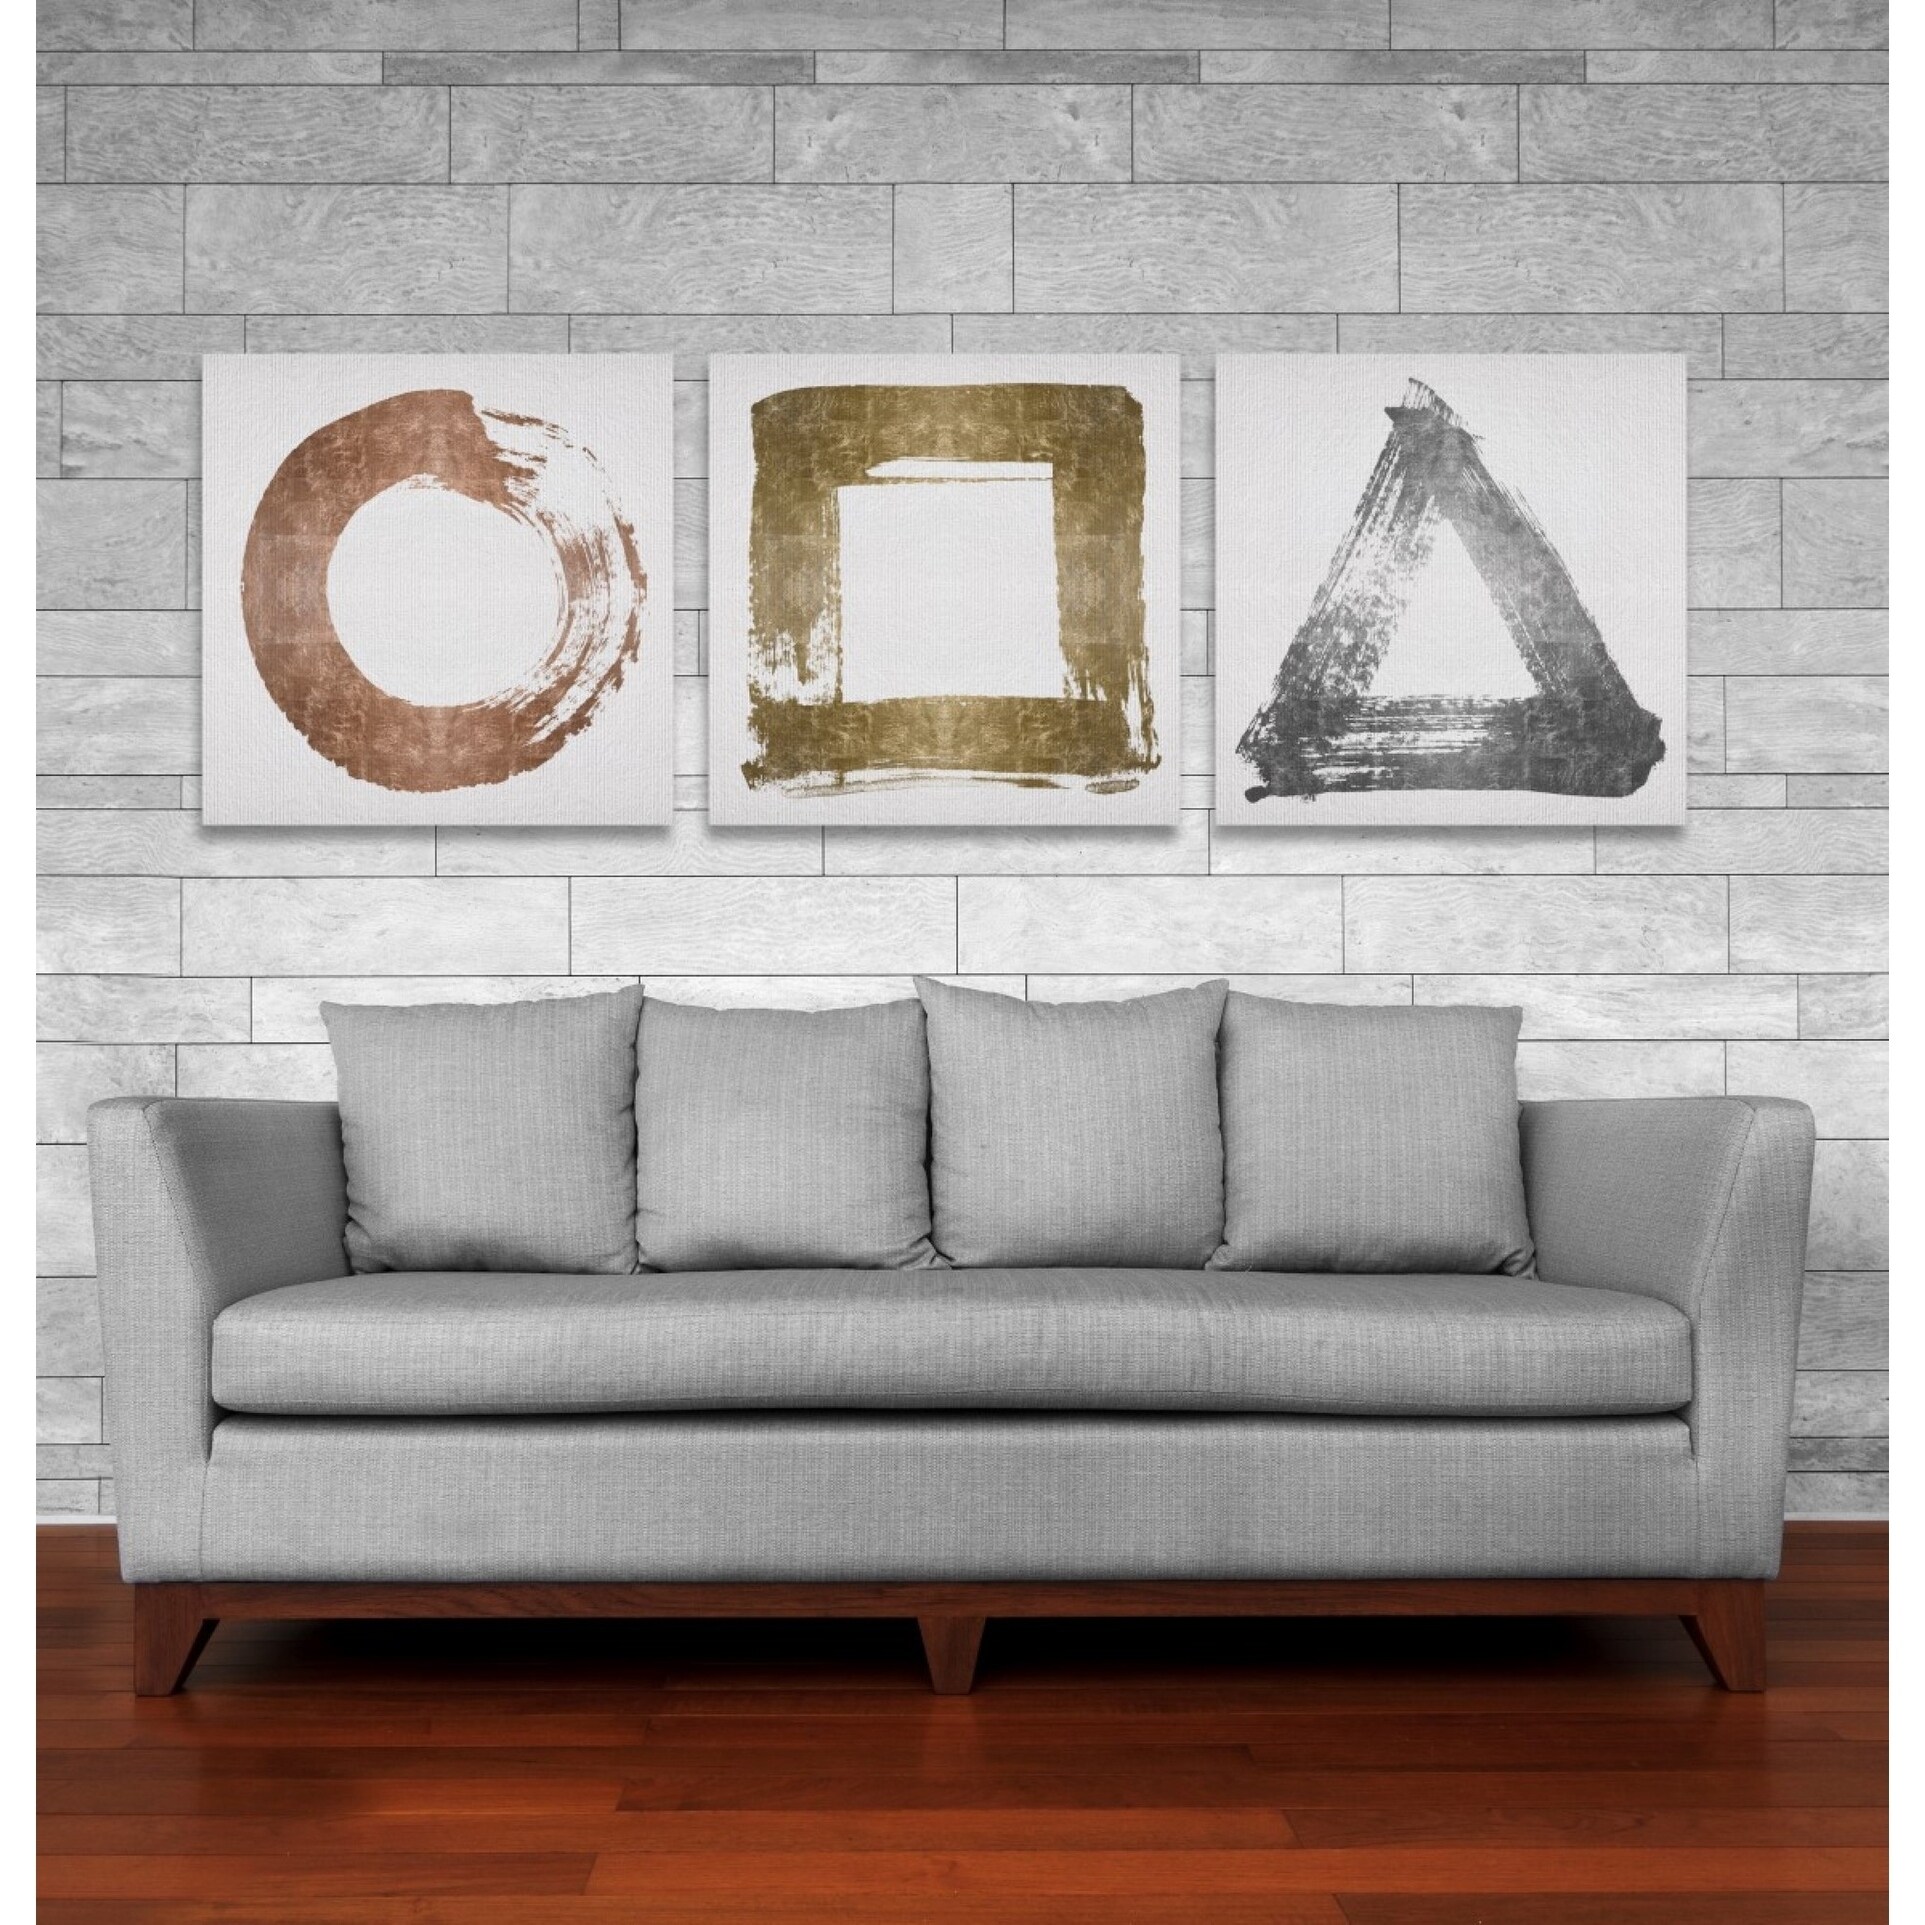 Shop Oliver Gal Whole Set Of 3 Abstract Wall Art Canvas Prints Gray Gold 20 X 20 X 3 Panels On Sale Overstock 29230434